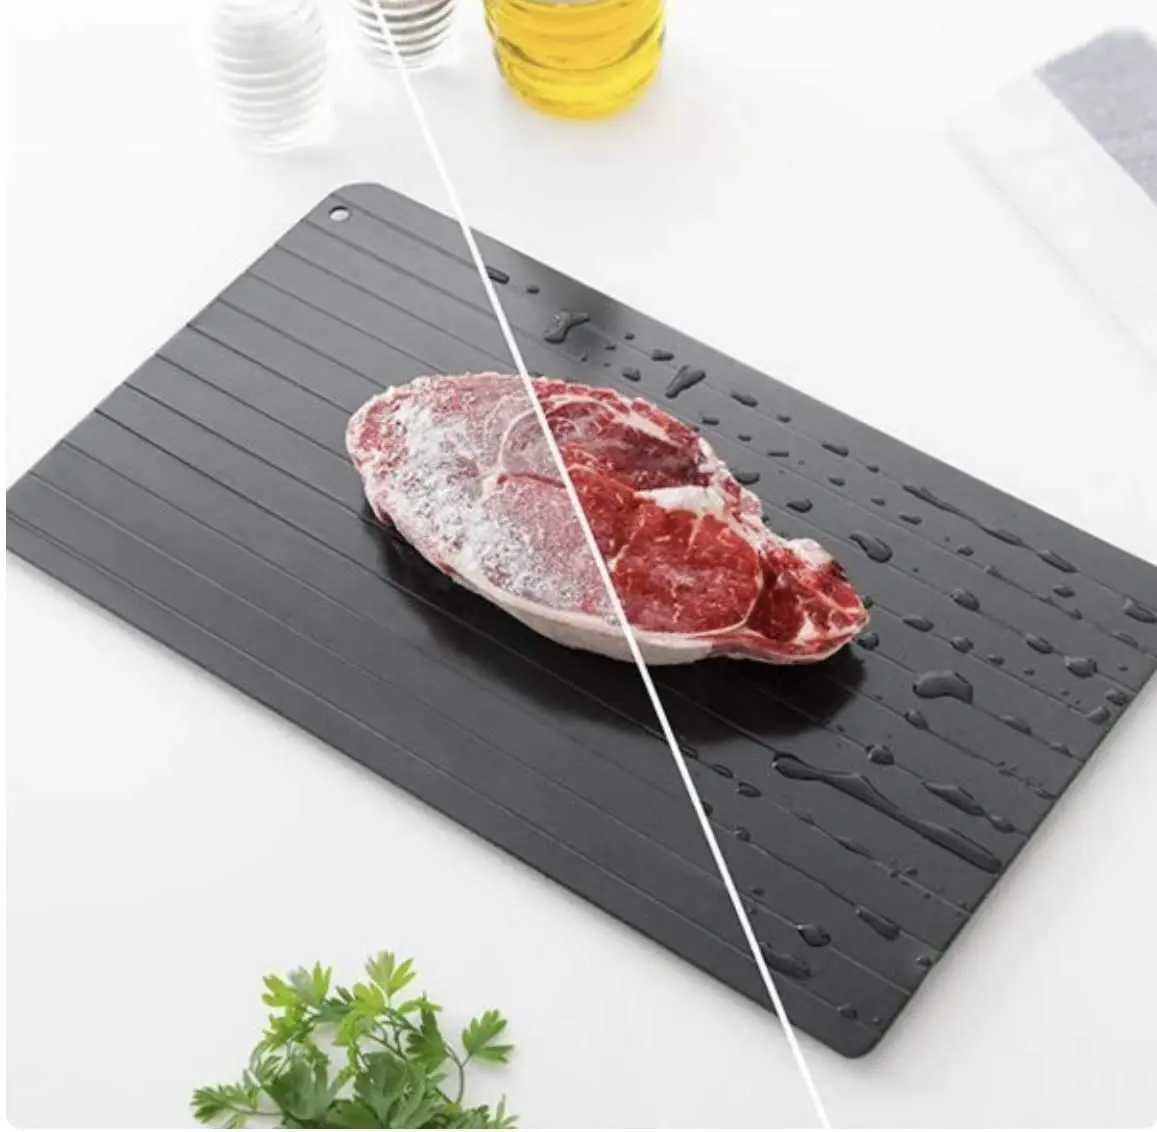 Defrosting Tray Meat Thawing Board Eco Friendly Defrost and Thaw Meat Quick and Safe